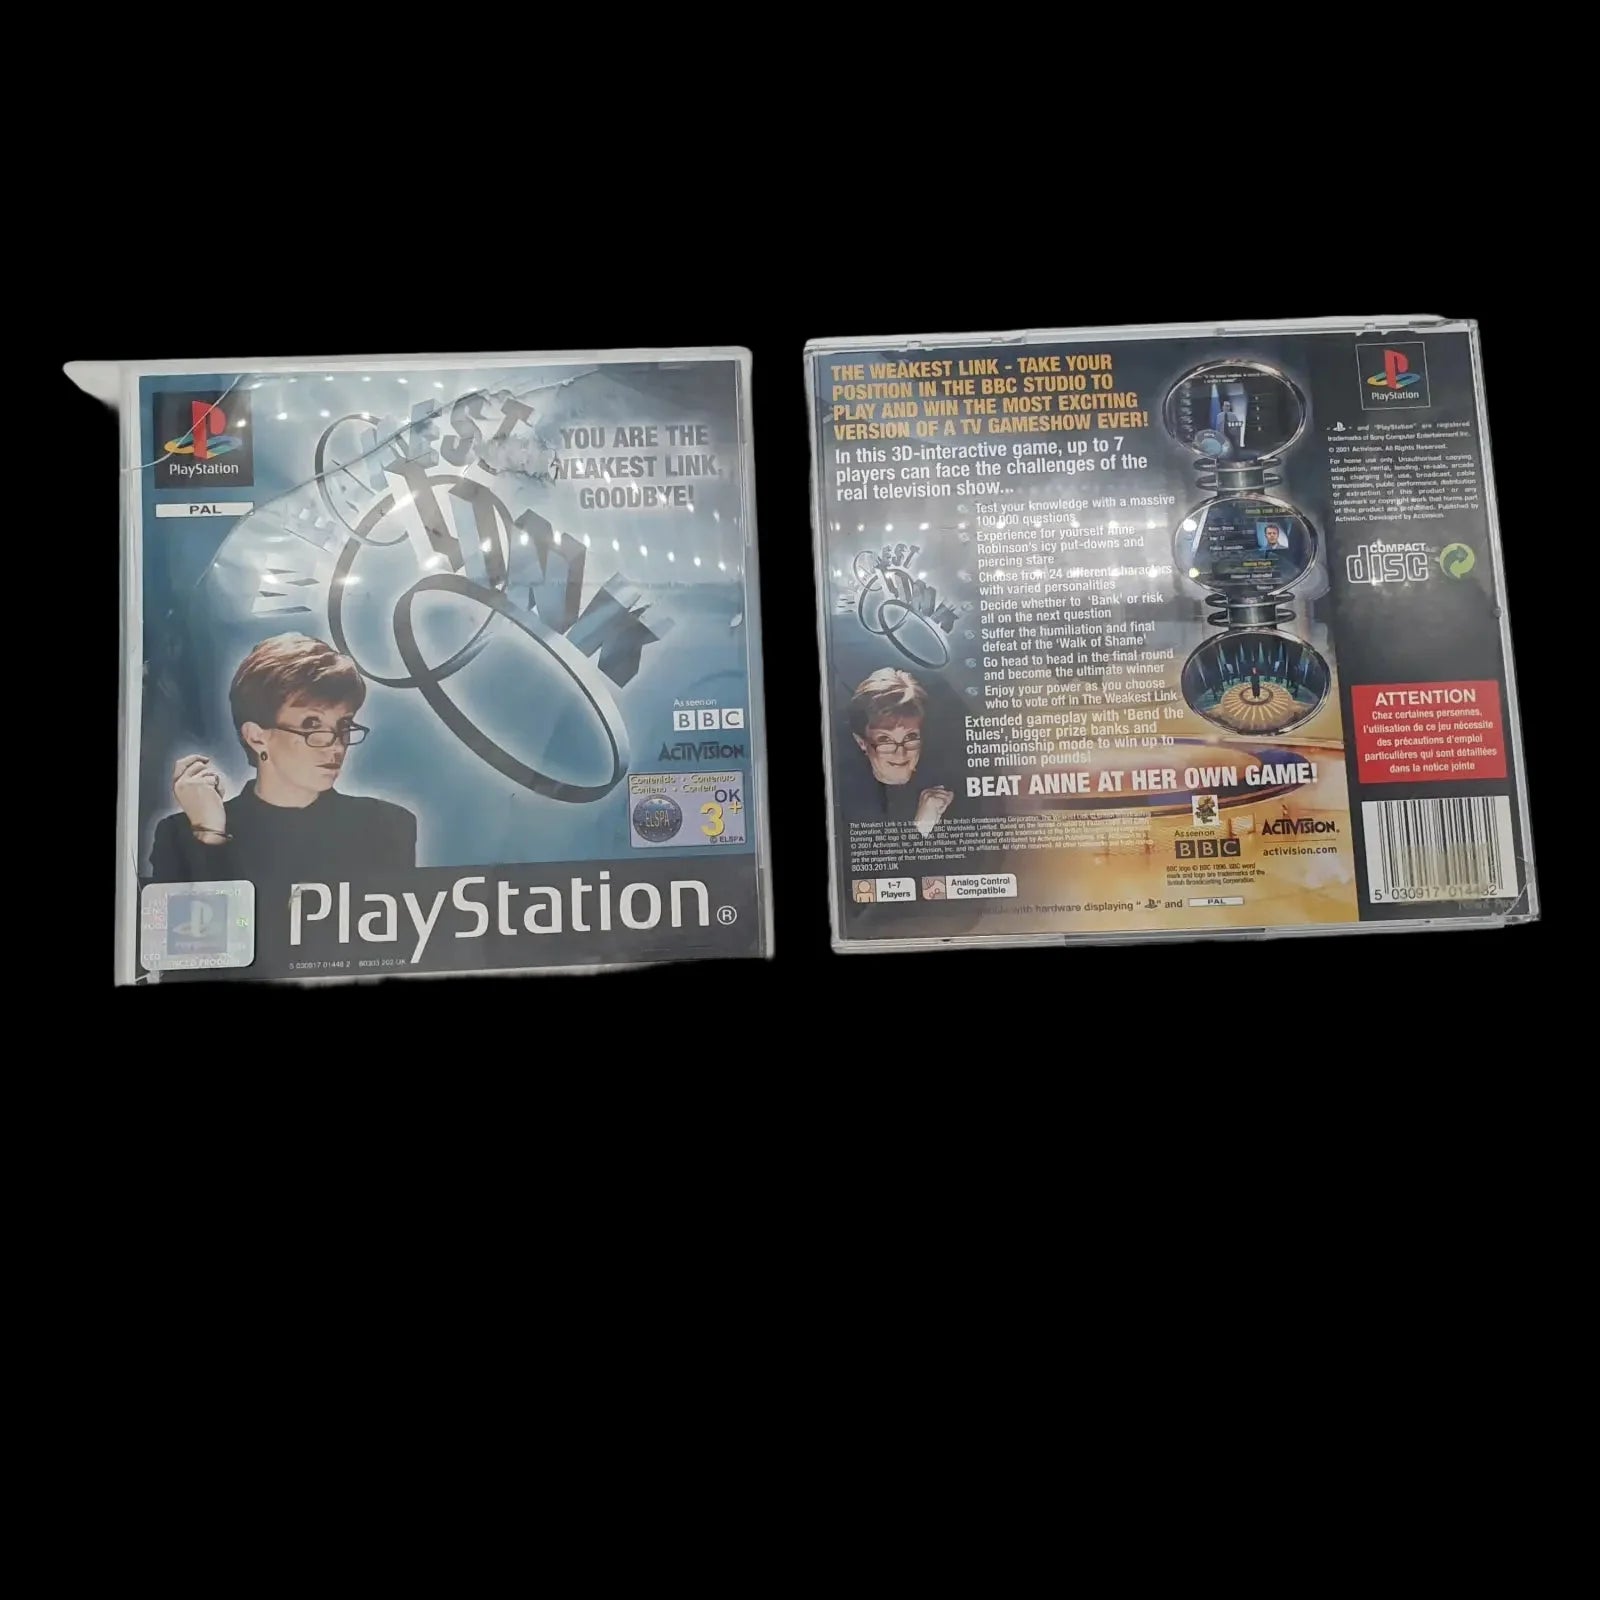 Weakest Link Playstation 1 Ps1 Activision 2001 Video Game